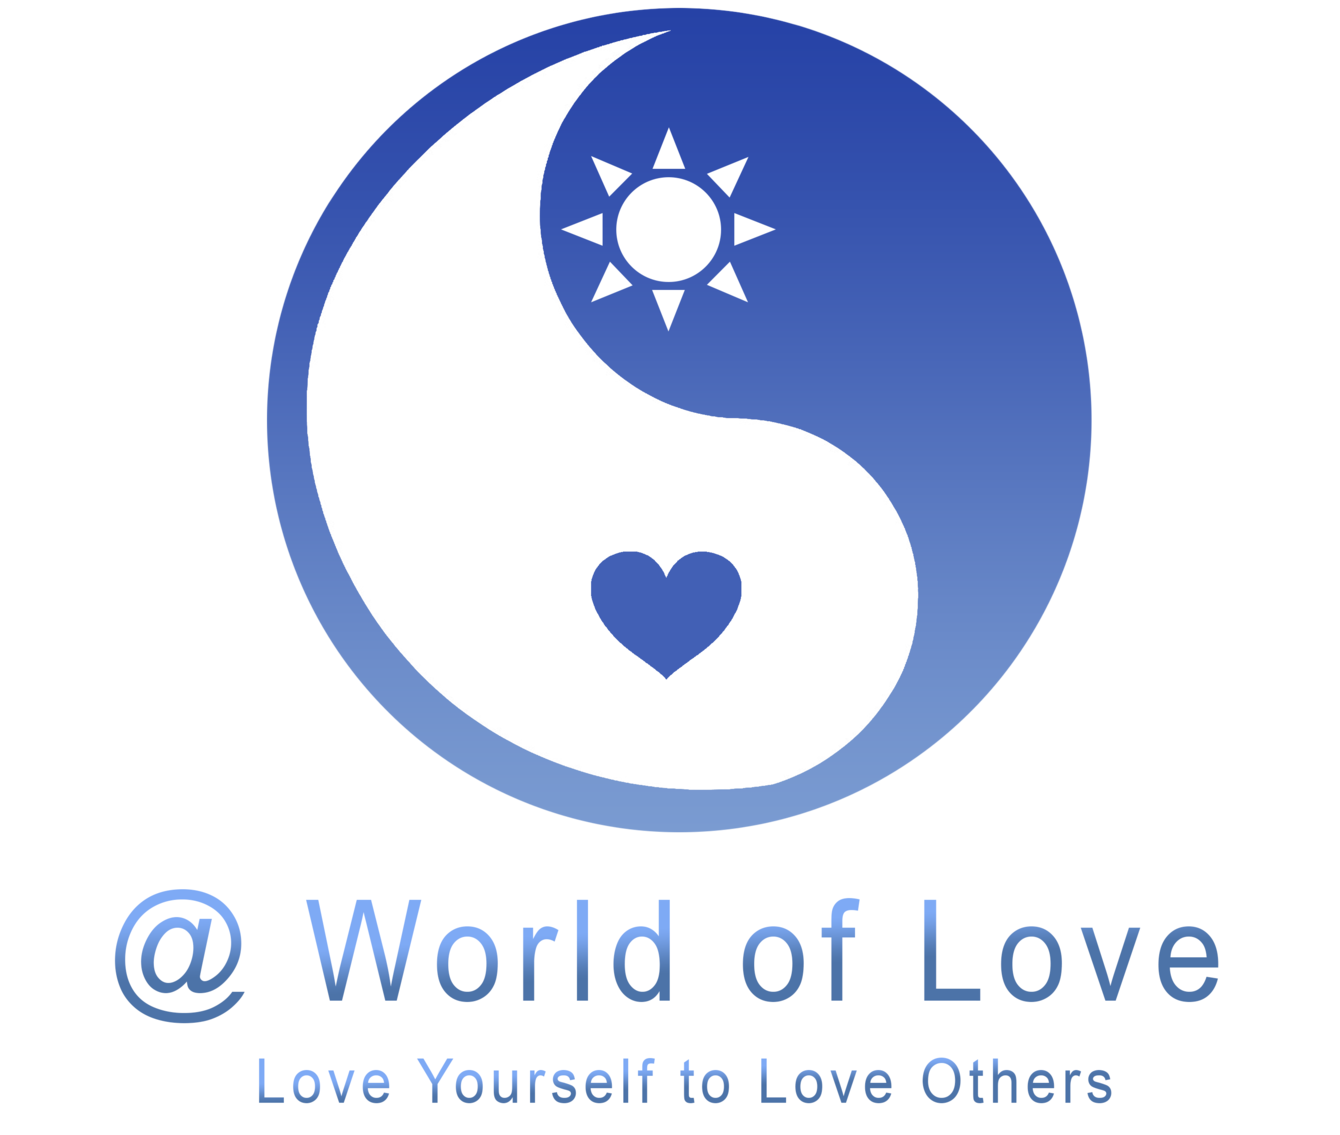 A World of Love